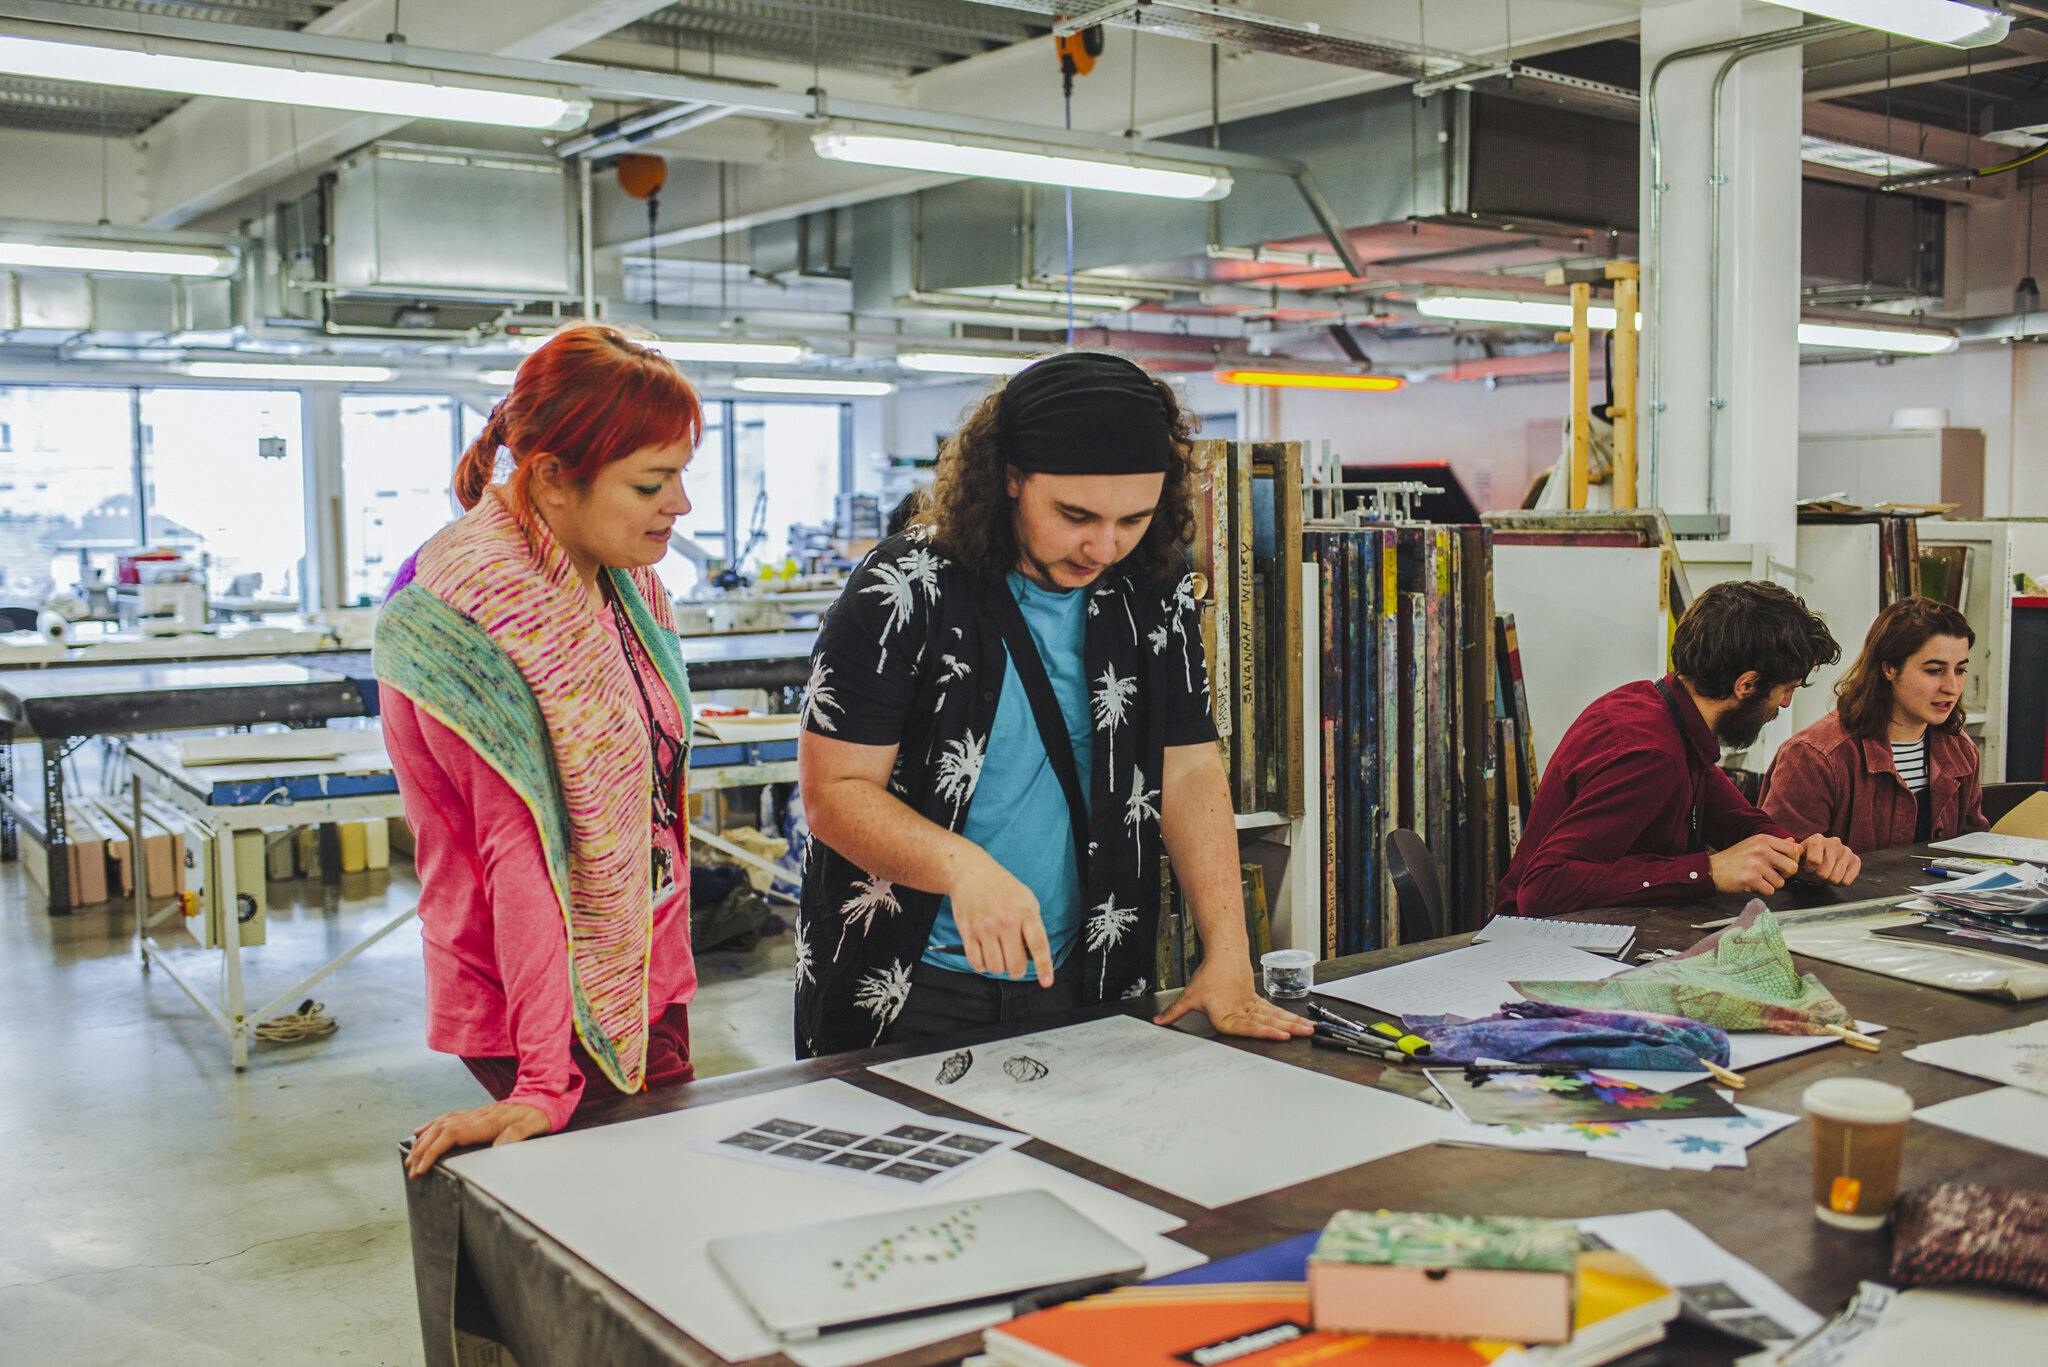 Lecturer Becky Dodman stands next to a textiles student and discuss his work laid out on the print table in front of them, a mix of bright colours and fabrics in our bright and open print studio